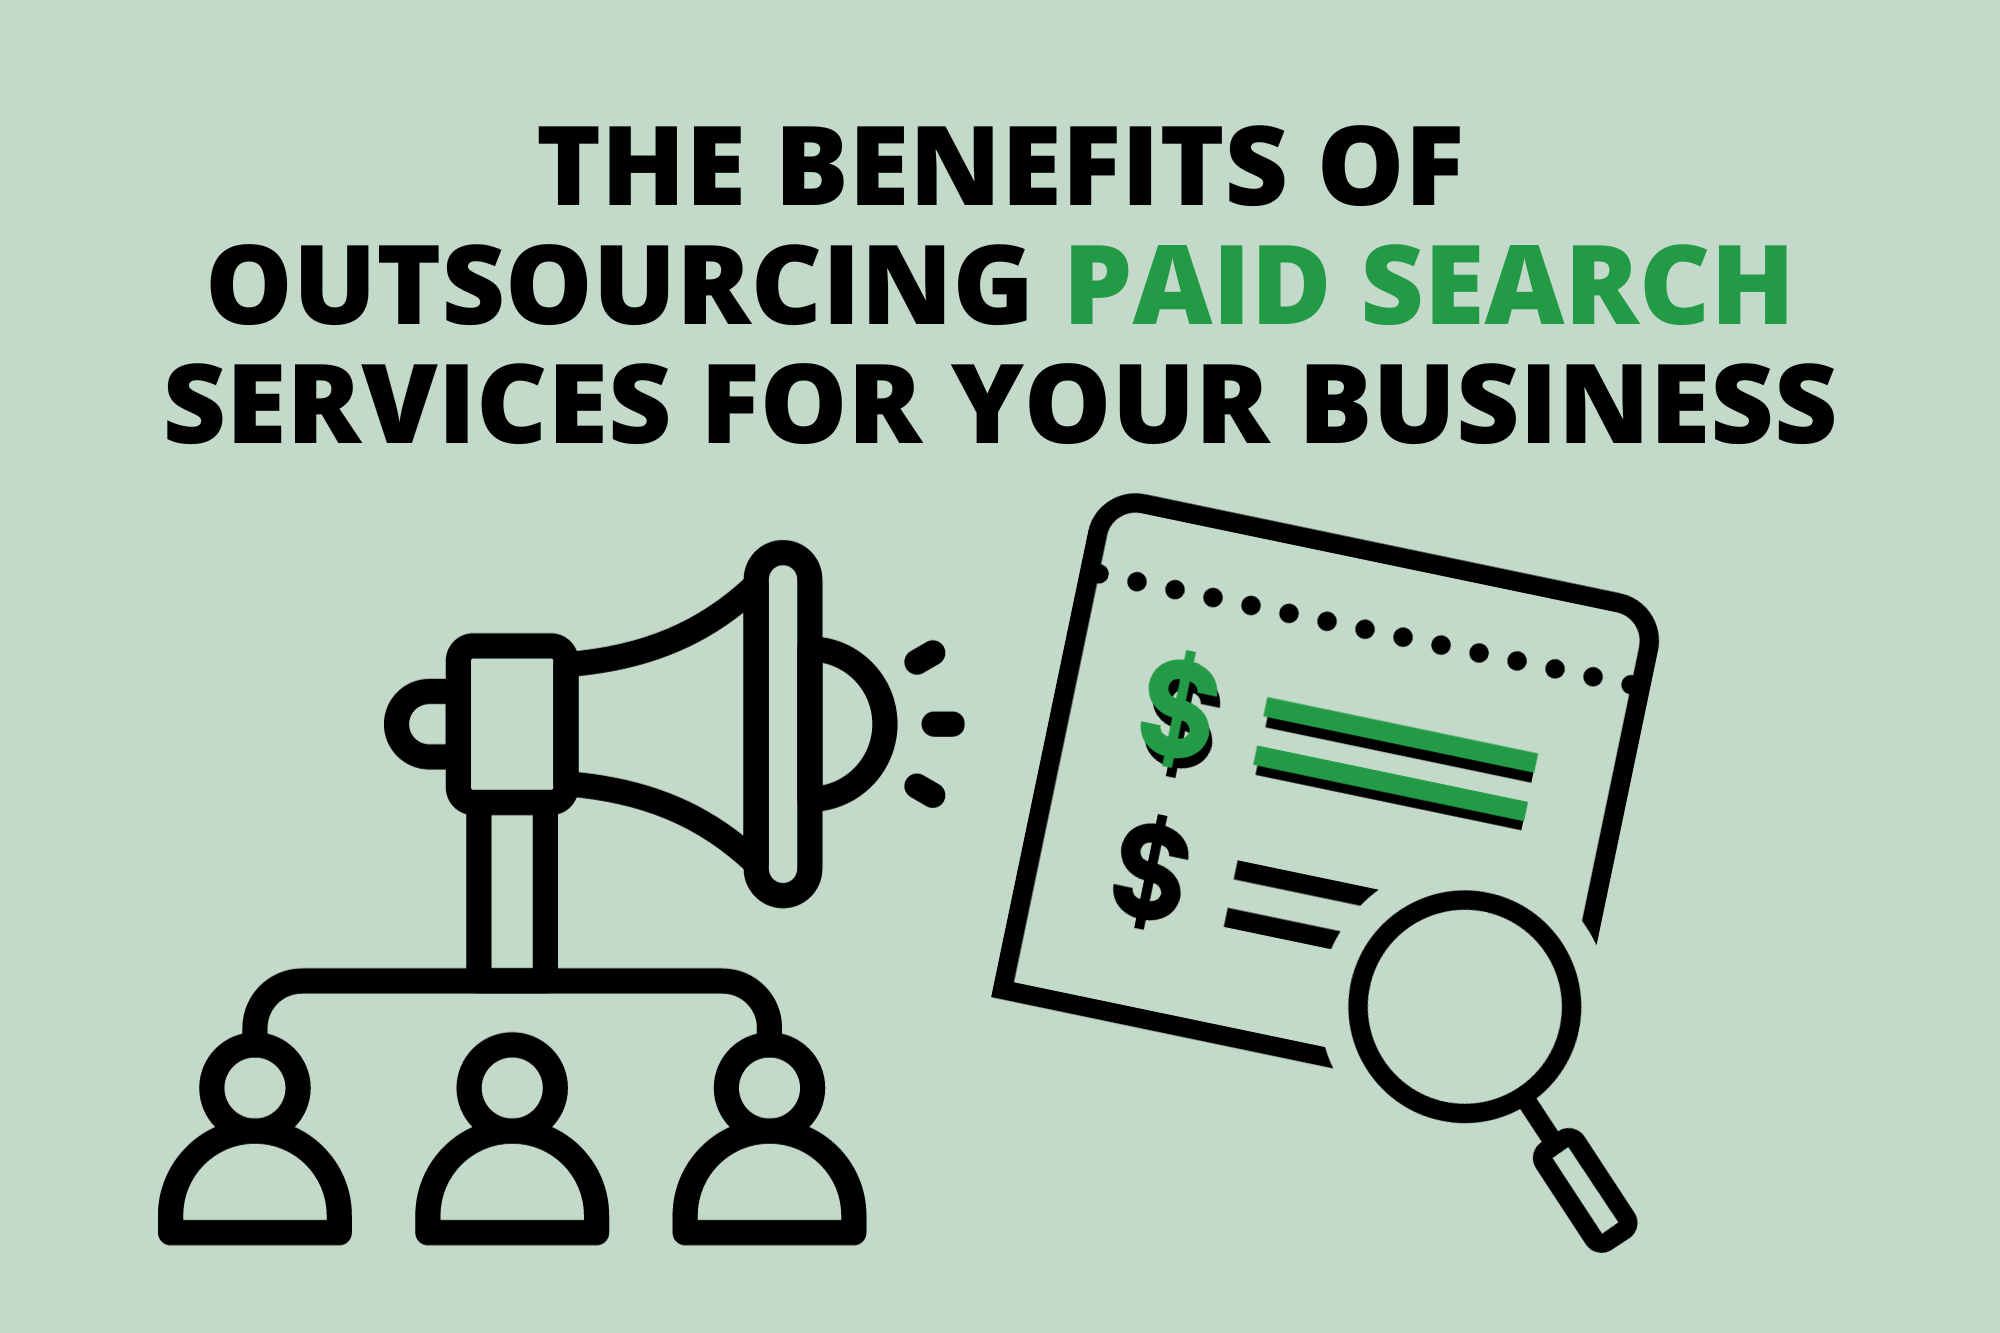 The Benefits of Outsourcing Paid Search Services for Your Business